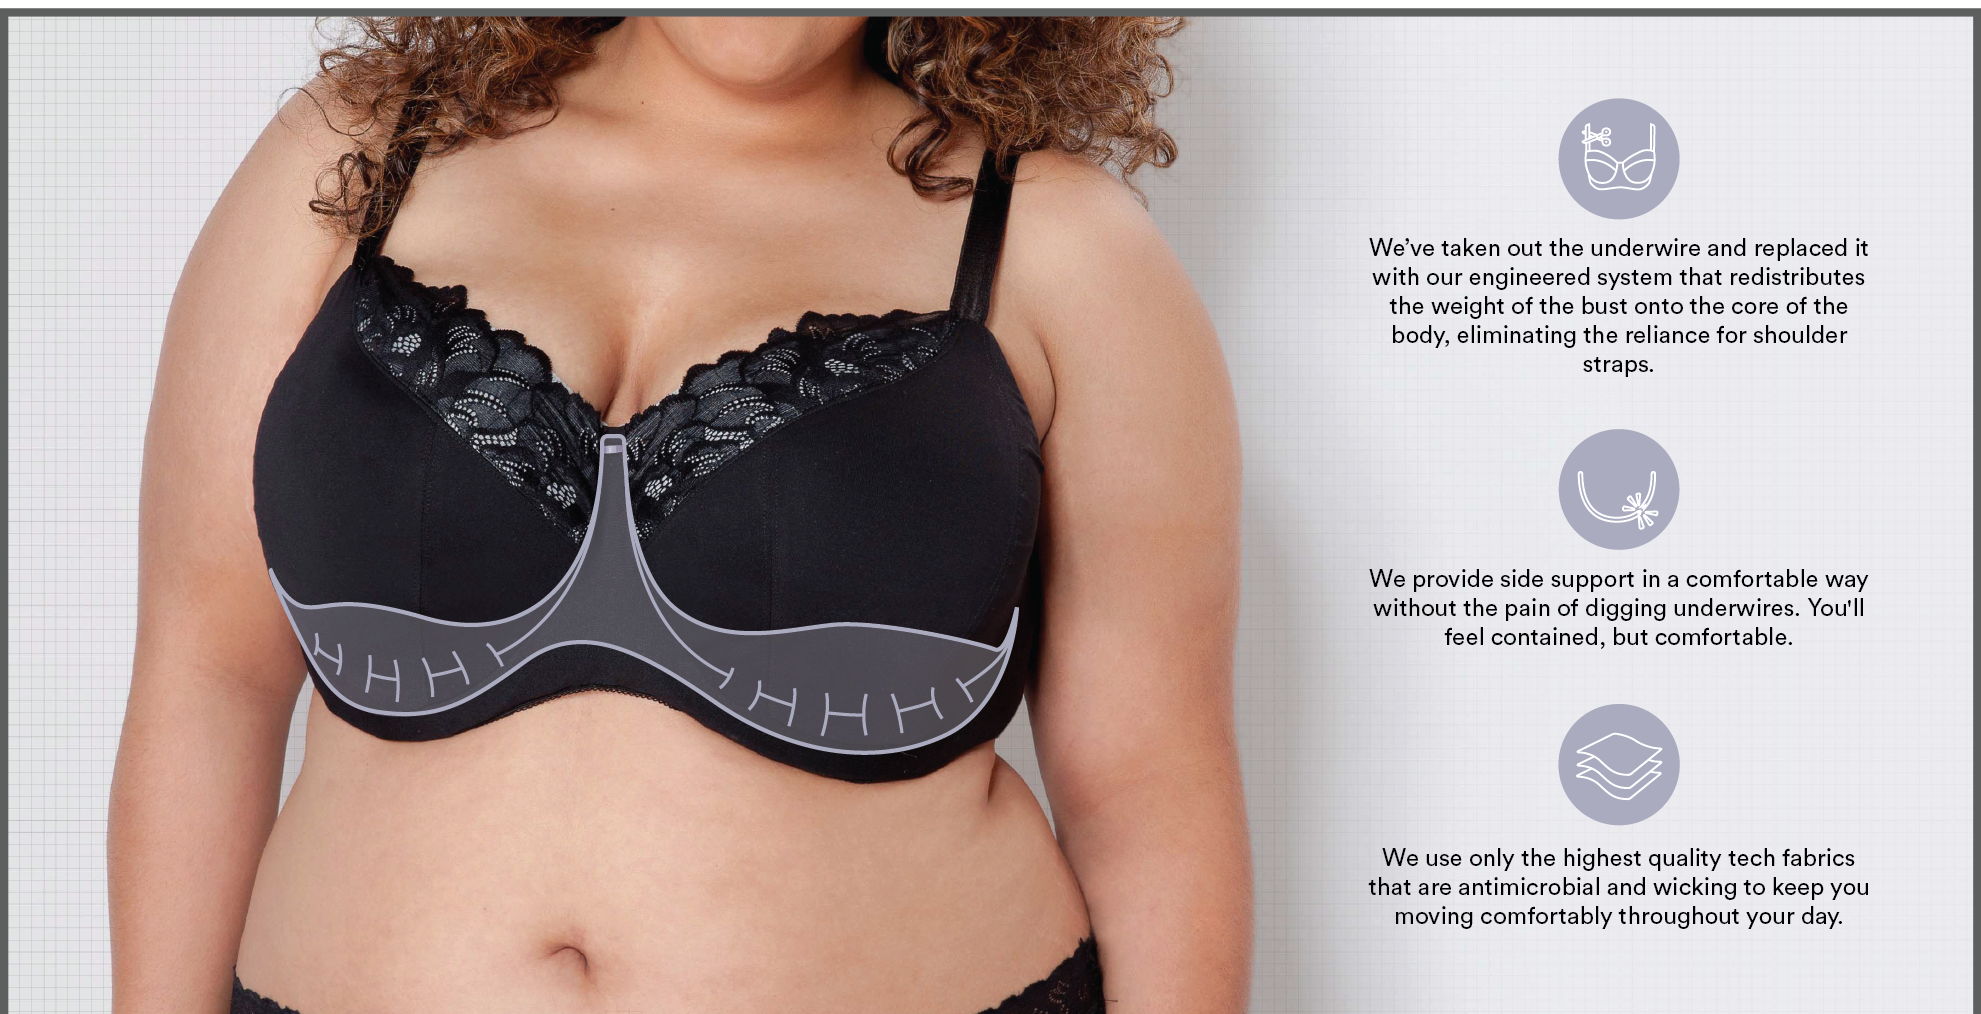 3D Printed Bras from Trusst Lingerie Provide a New Level of